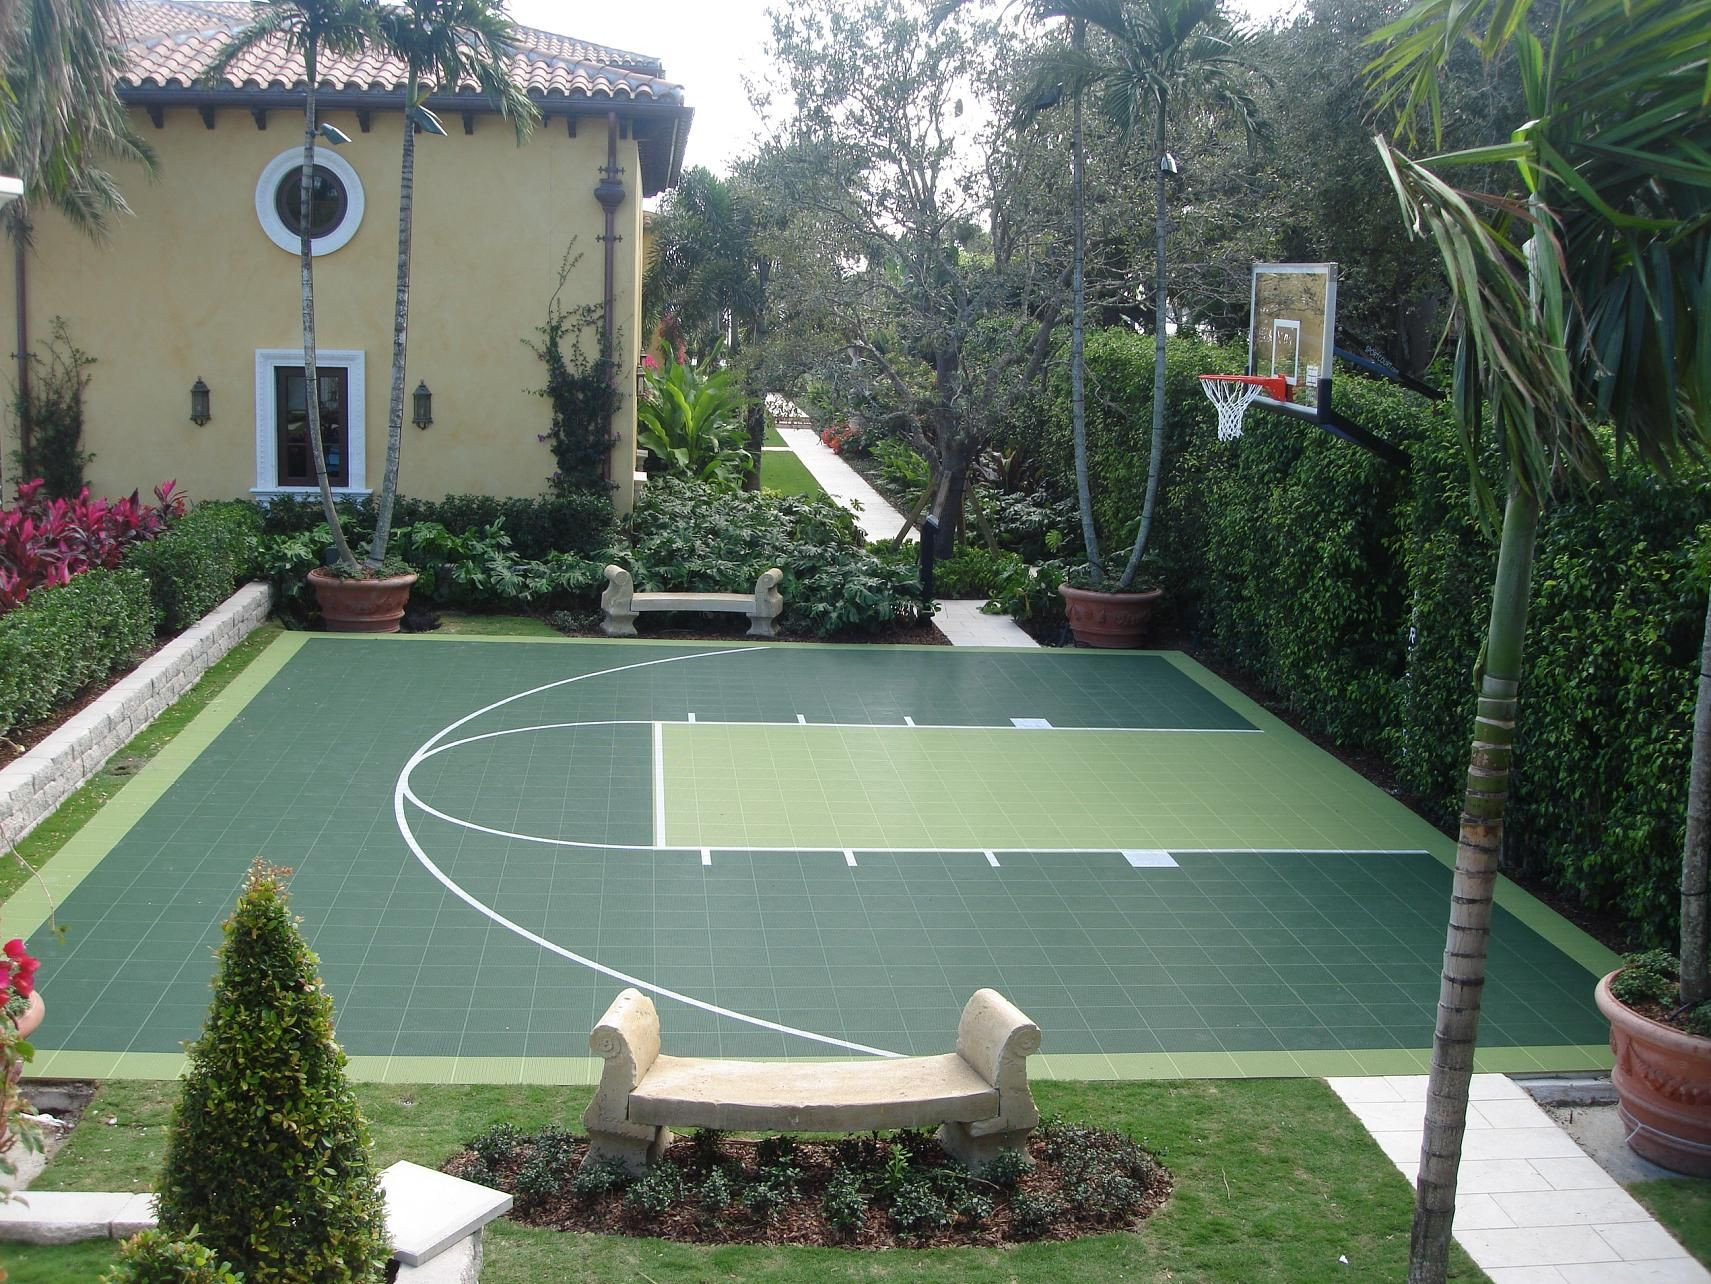 Backyard Half Court Basketball
 Check out this two tone Green Basketball Half Court Great